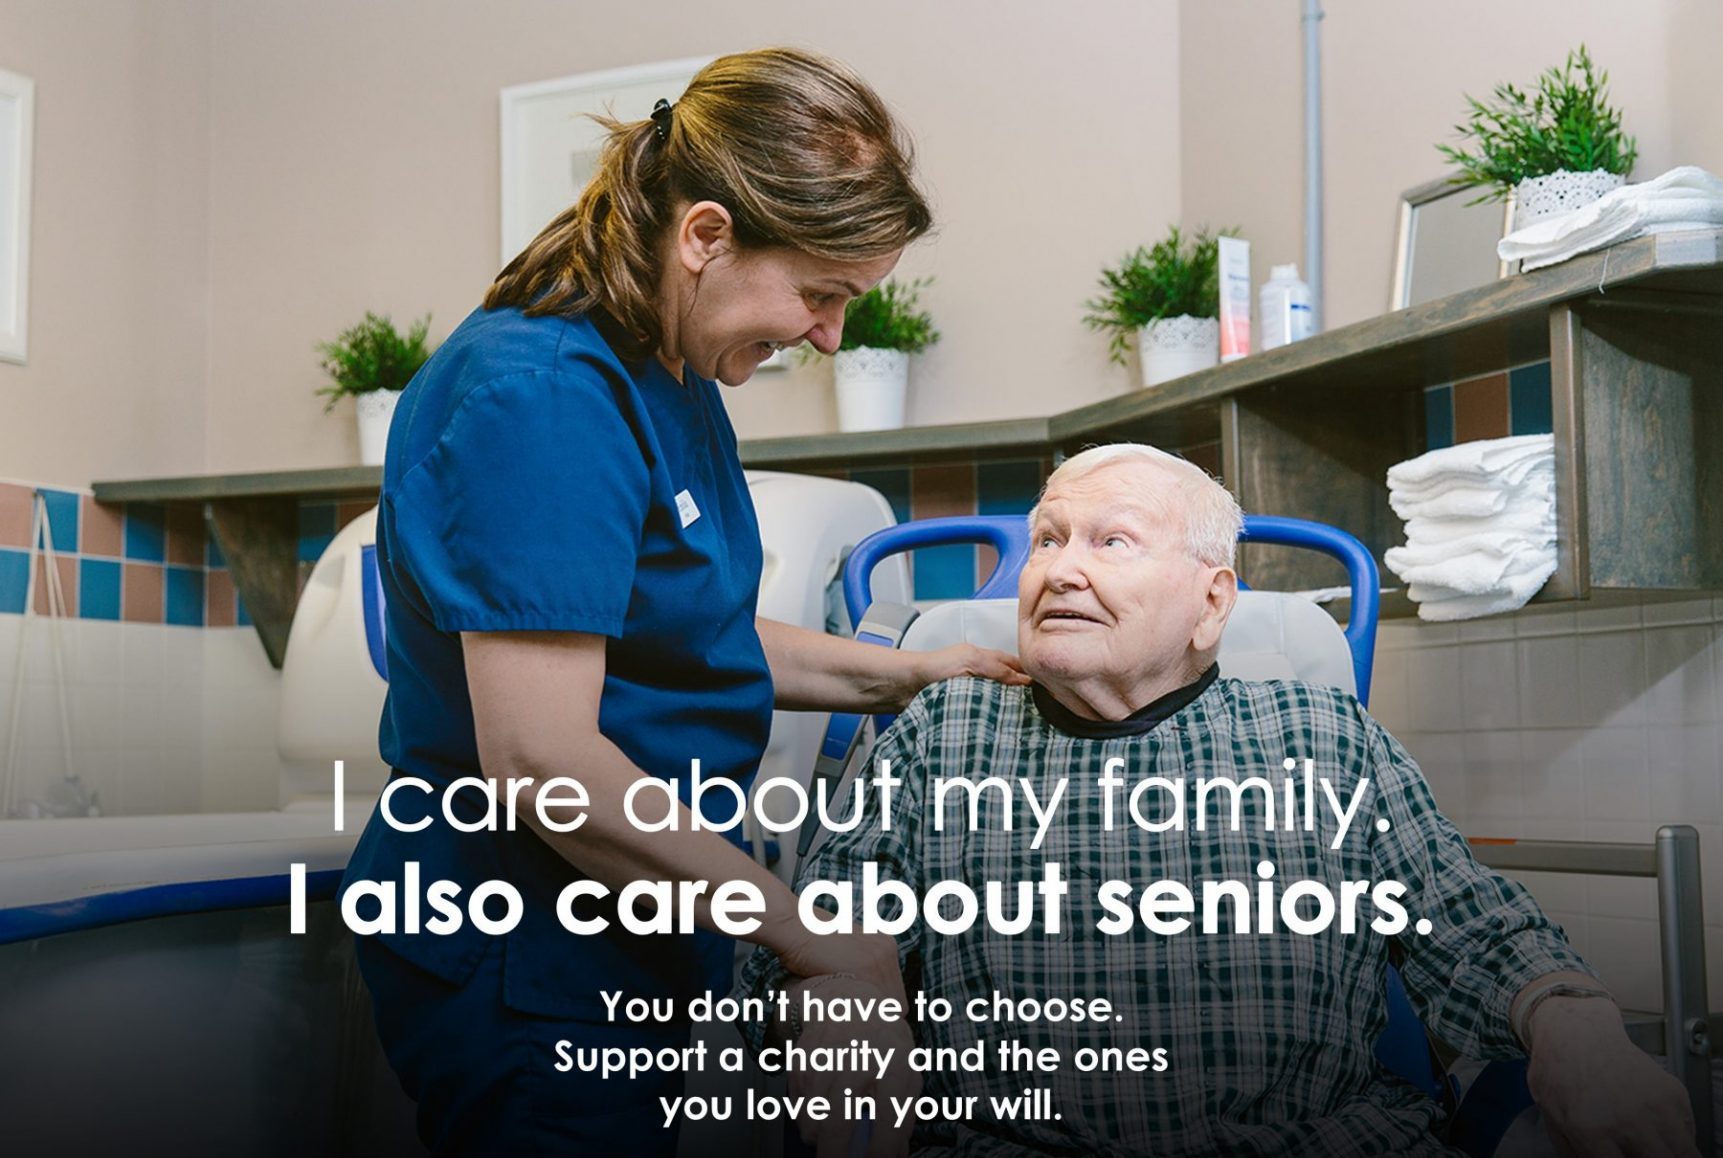 Health care worker assisting a senior